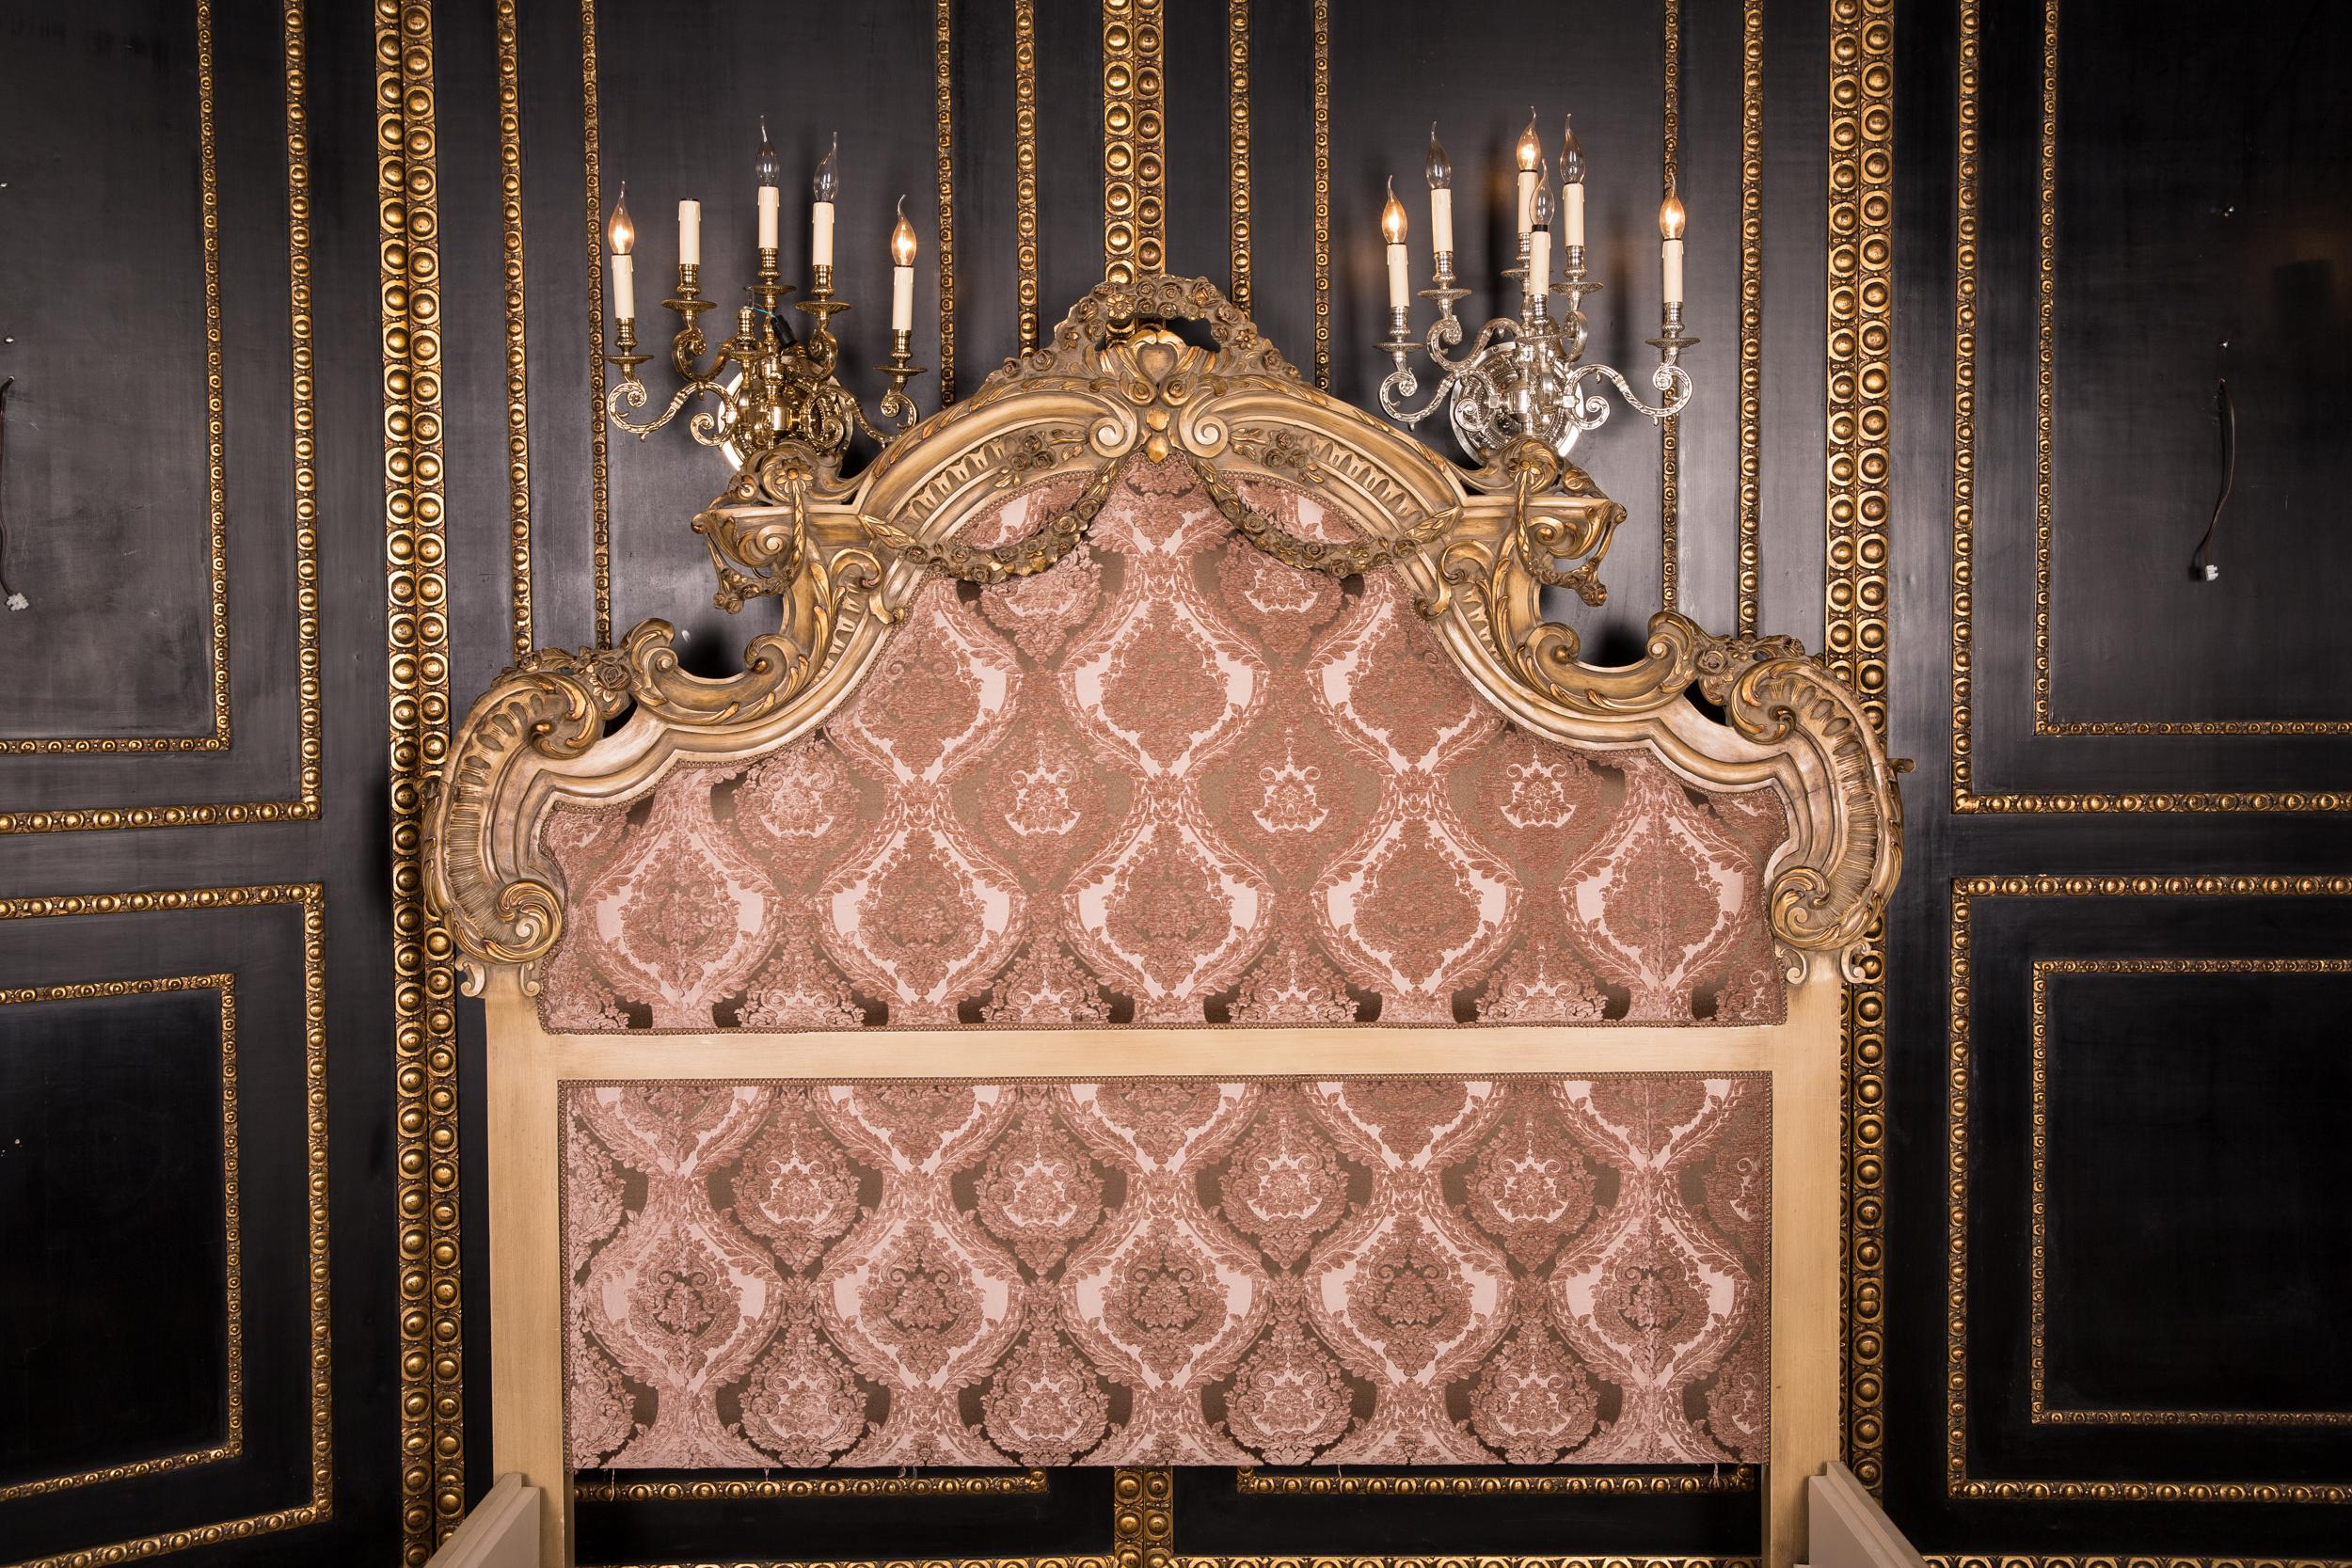 Beech Magnificent Double Bed in the Style of Louis Quinze XVI